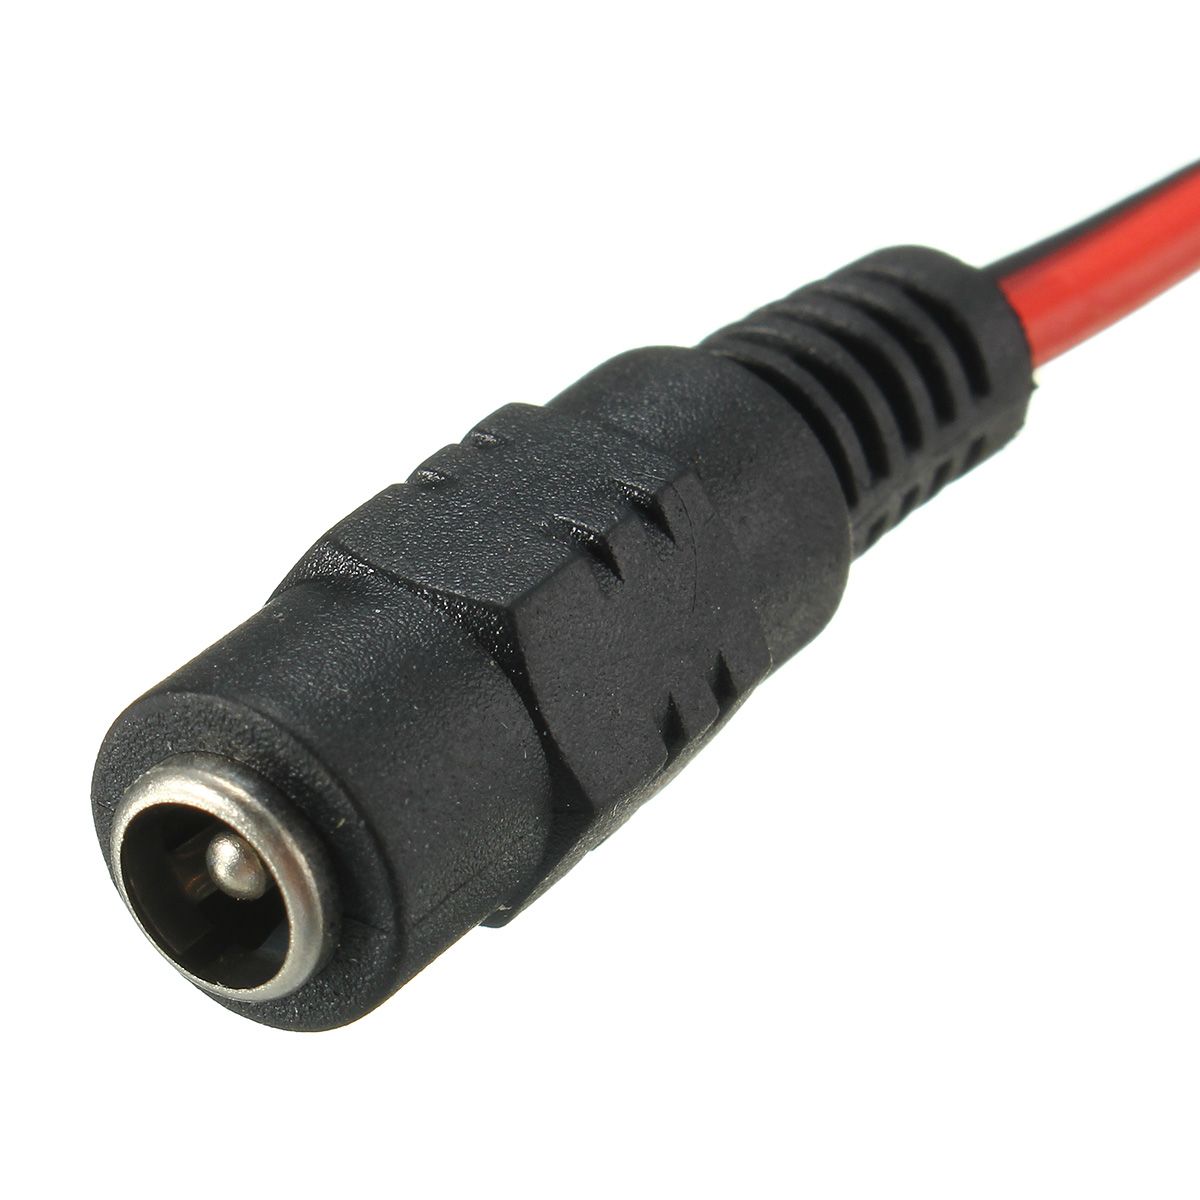 10PCS-LUSTREON-DC12V-Female-Power-Supply-Jack-Connector-Cable-Plug-Cord-Wire-55mm-x-21mm-1369157